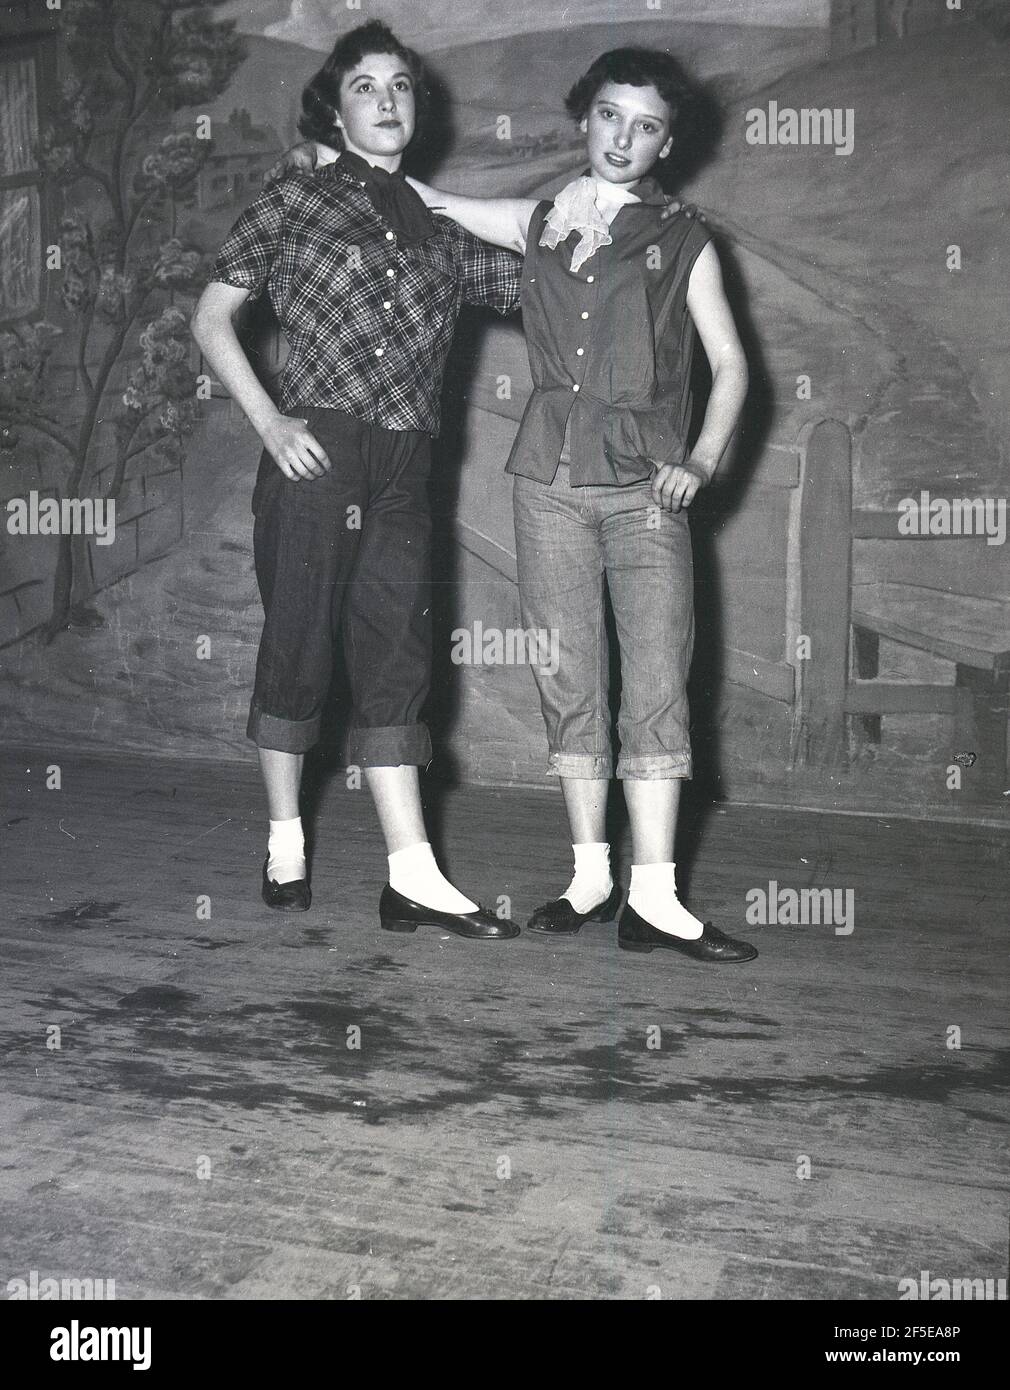 1956, historical, standing on a stage, two young ladies in the costumes of their characters from the play, Jack & the Beanstalk, England, UK. An ancient folk story, it was first published as an English fairy tale, 'The Story of Jack Spriggins and the Enchanted Bean' in 1734 and then in 1807 in 'The History of Jack and the Bean-Stalk' by Benjamin Tabert.  Fairy tales are ancient folklore, featuriing mythical creatures; elves, fairies, talking animals, witches and giants in magical stories that are far-fetched and not true and indeed could not possiblly be true. Stock Photo